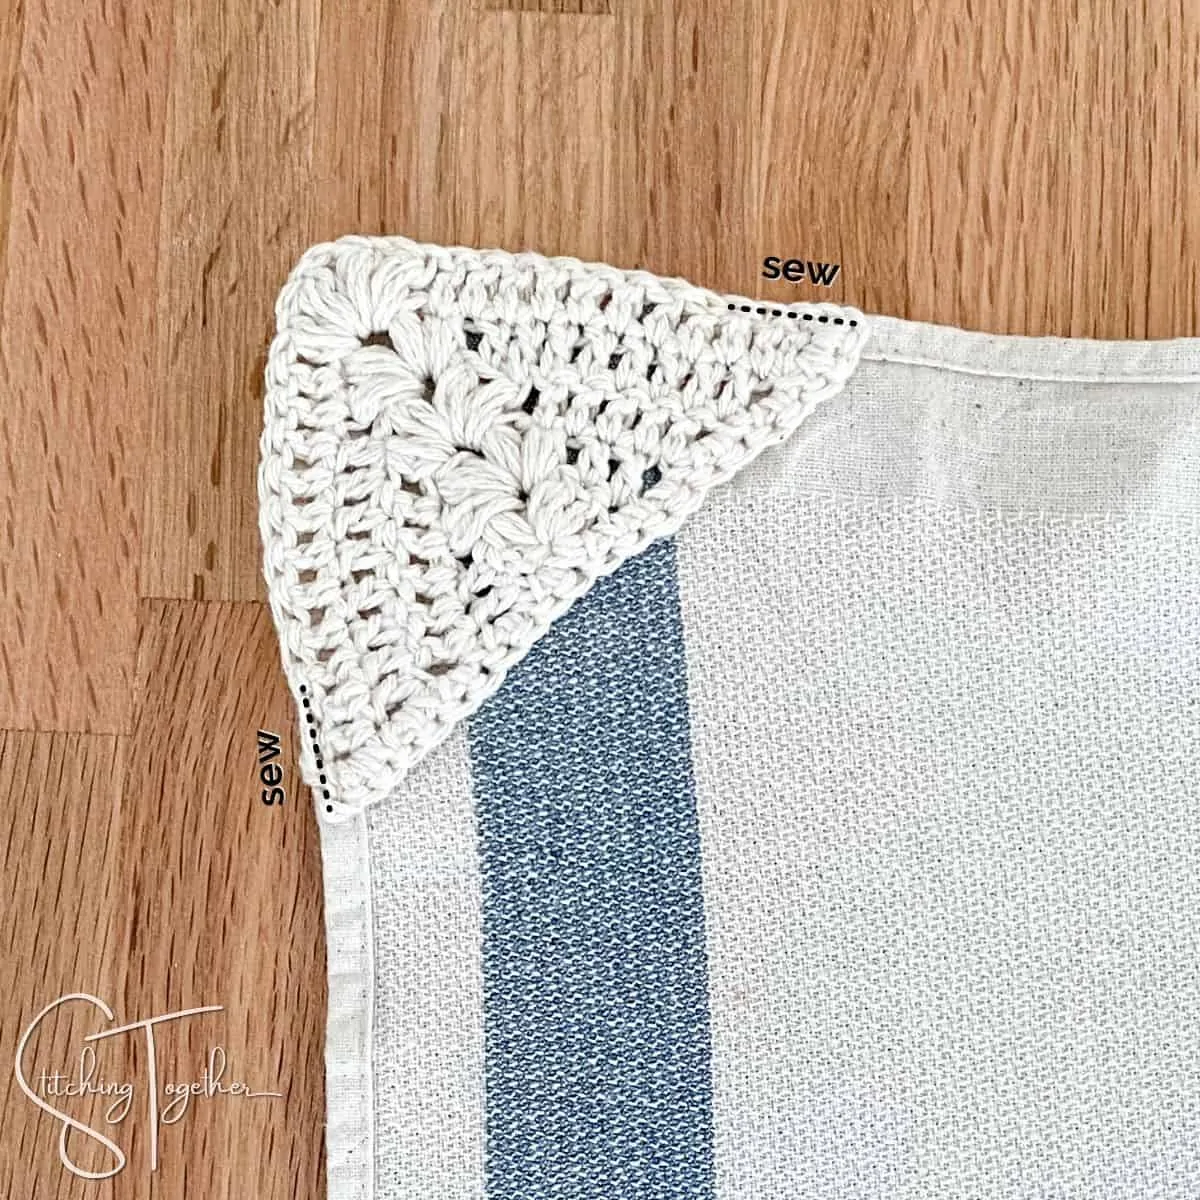 https://www.stitching-together.com/wp-content/uploads/2020/09/towel-topper-how-to.webp